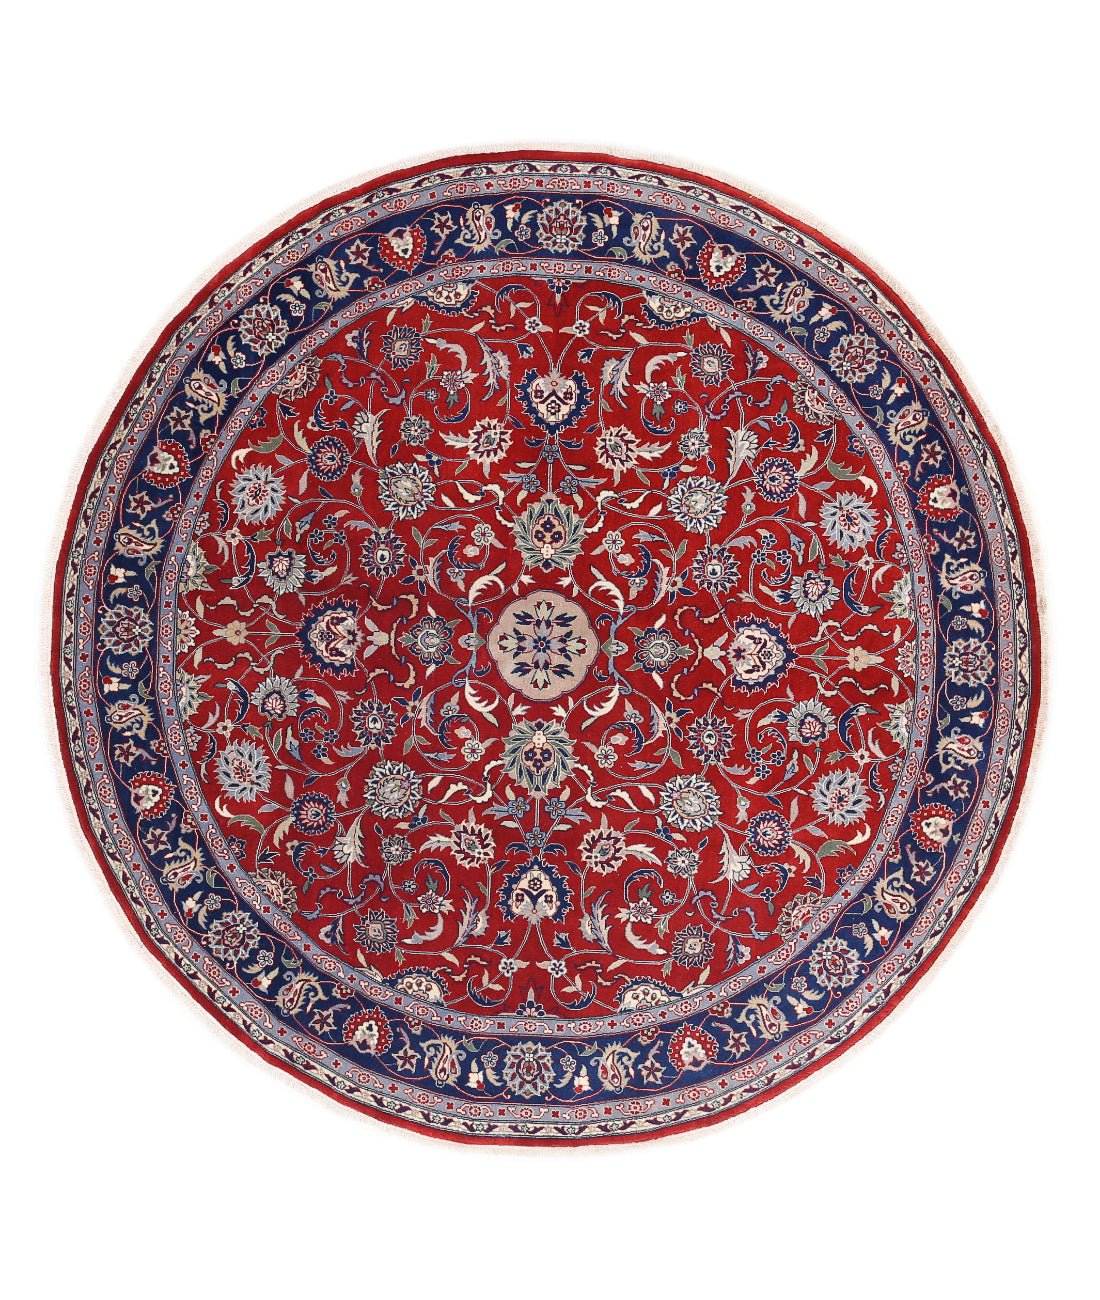 Hand Knotted Heritage Persian Style Wool Rug - 6'7'' x 6'7'' 6'7'' x 6'7'' (198 X 198) / Red / Blue